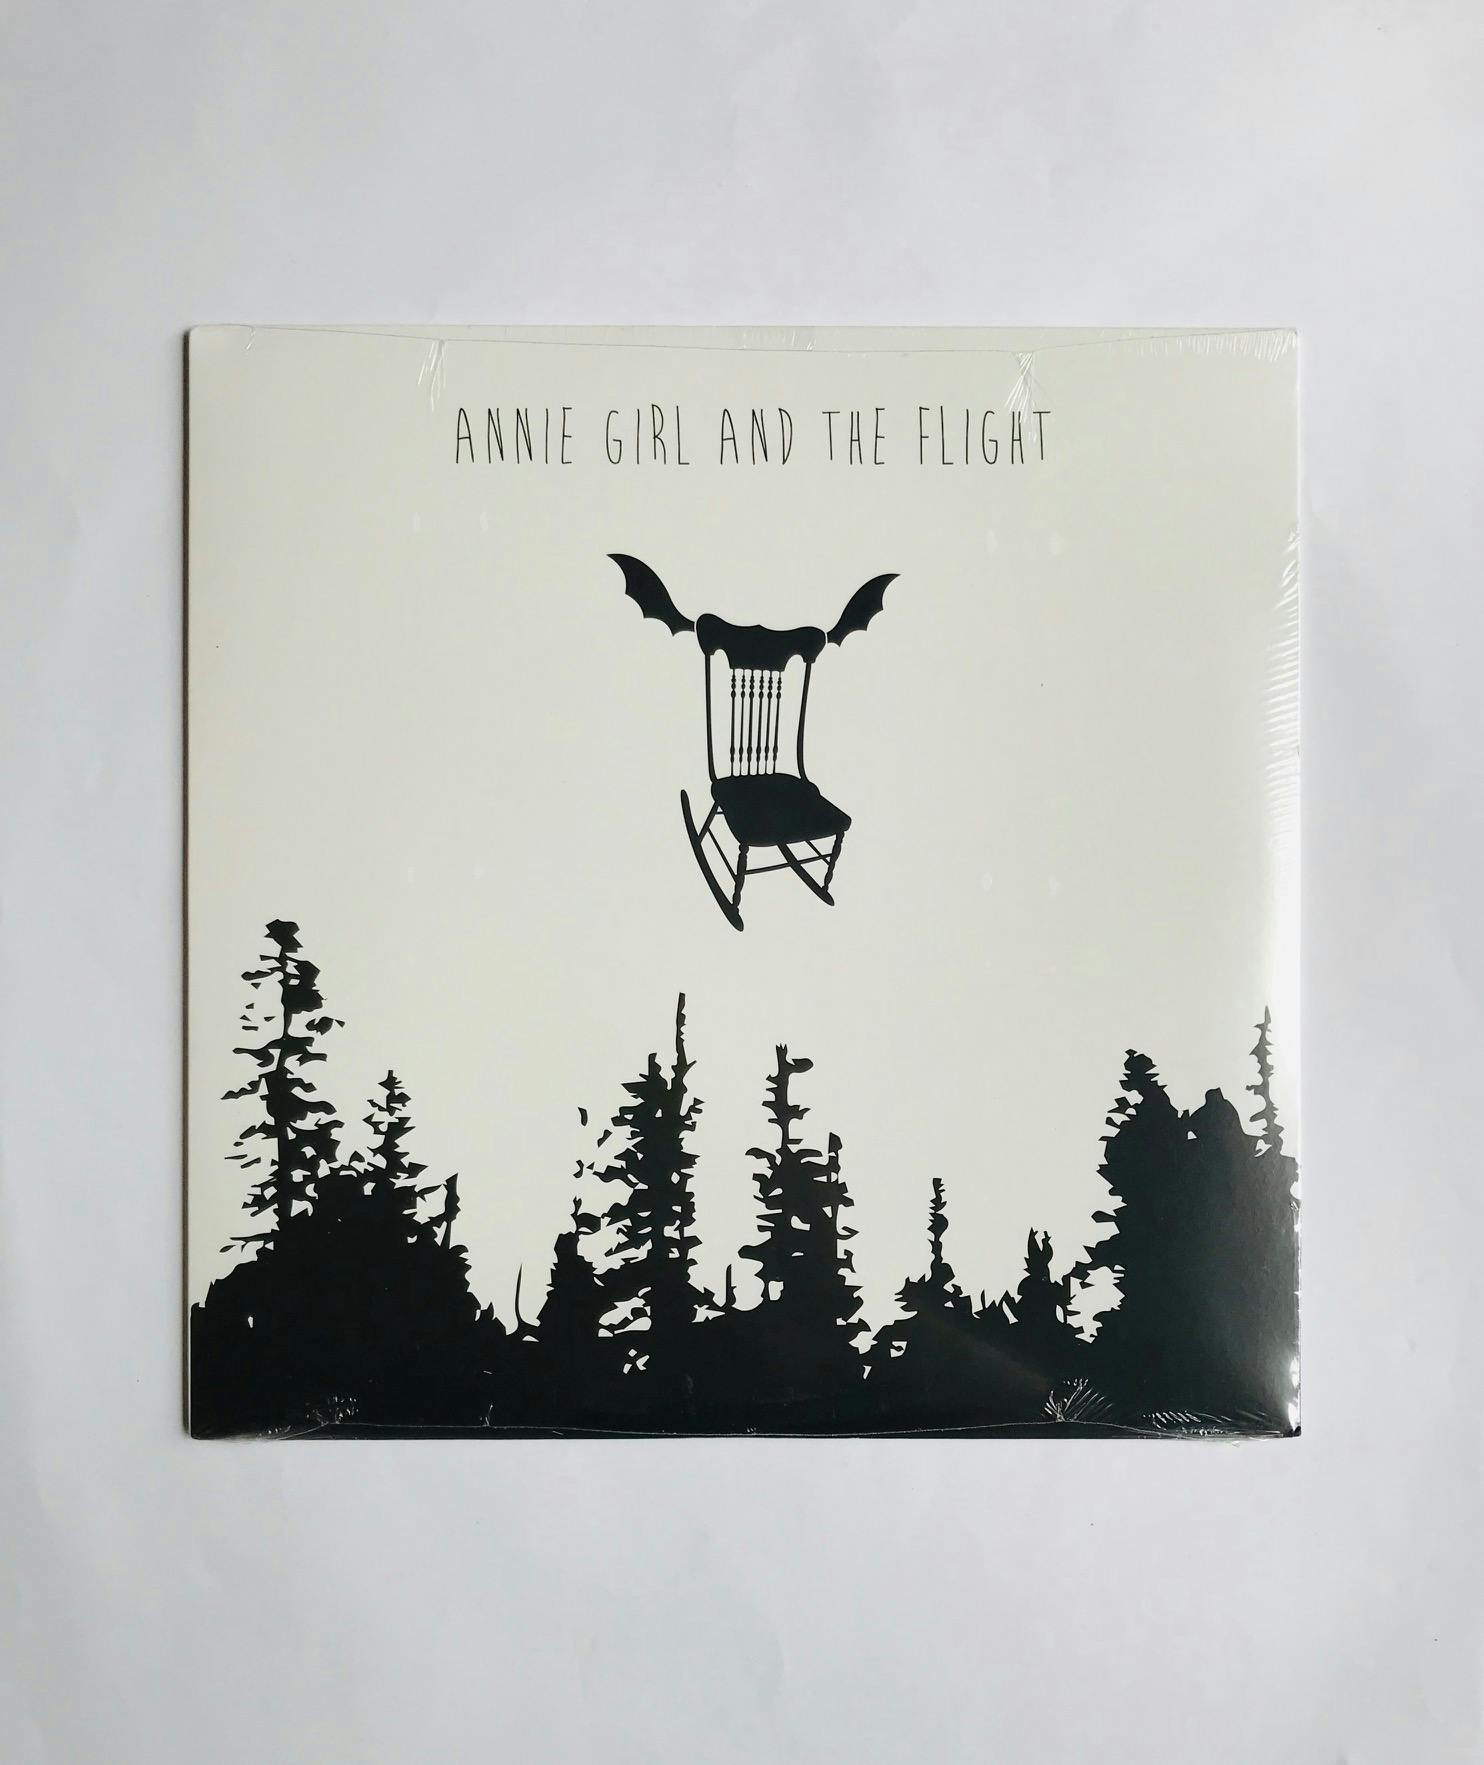 ANNIE GIRL AND THE FLIGHT, Annie Girl & The Flight